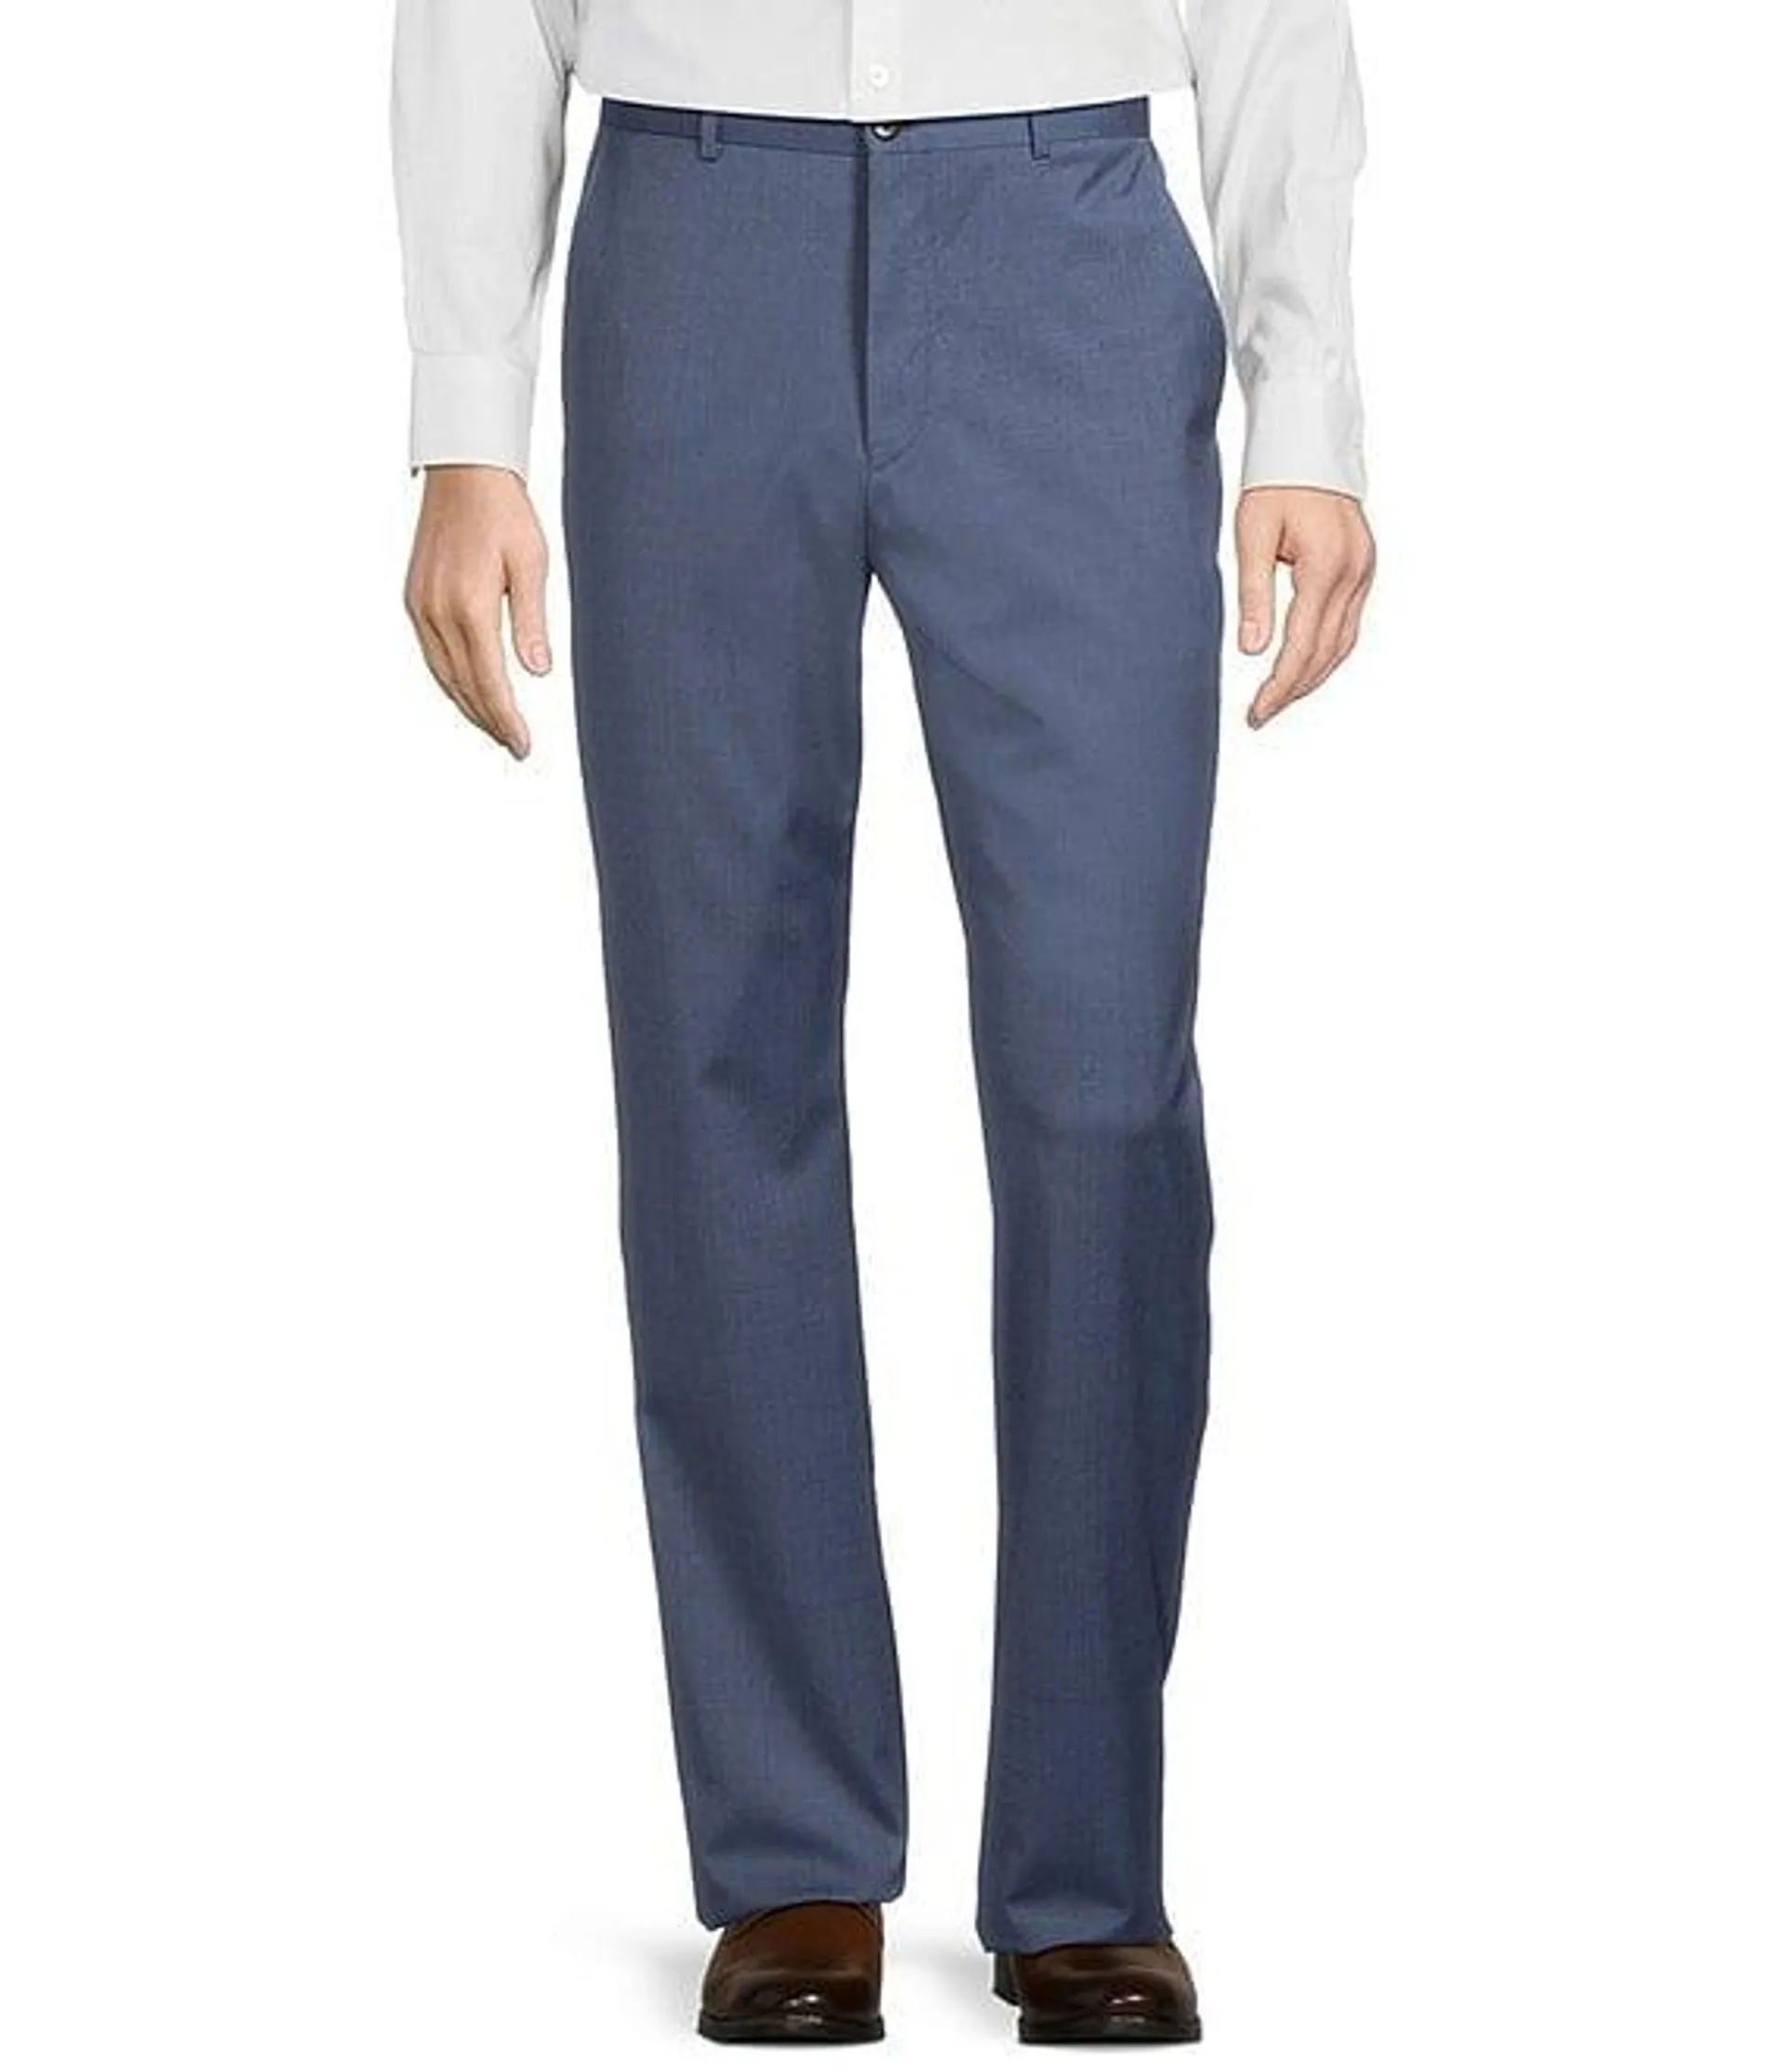 Modern Fit Flat Front Solid Dress Pants